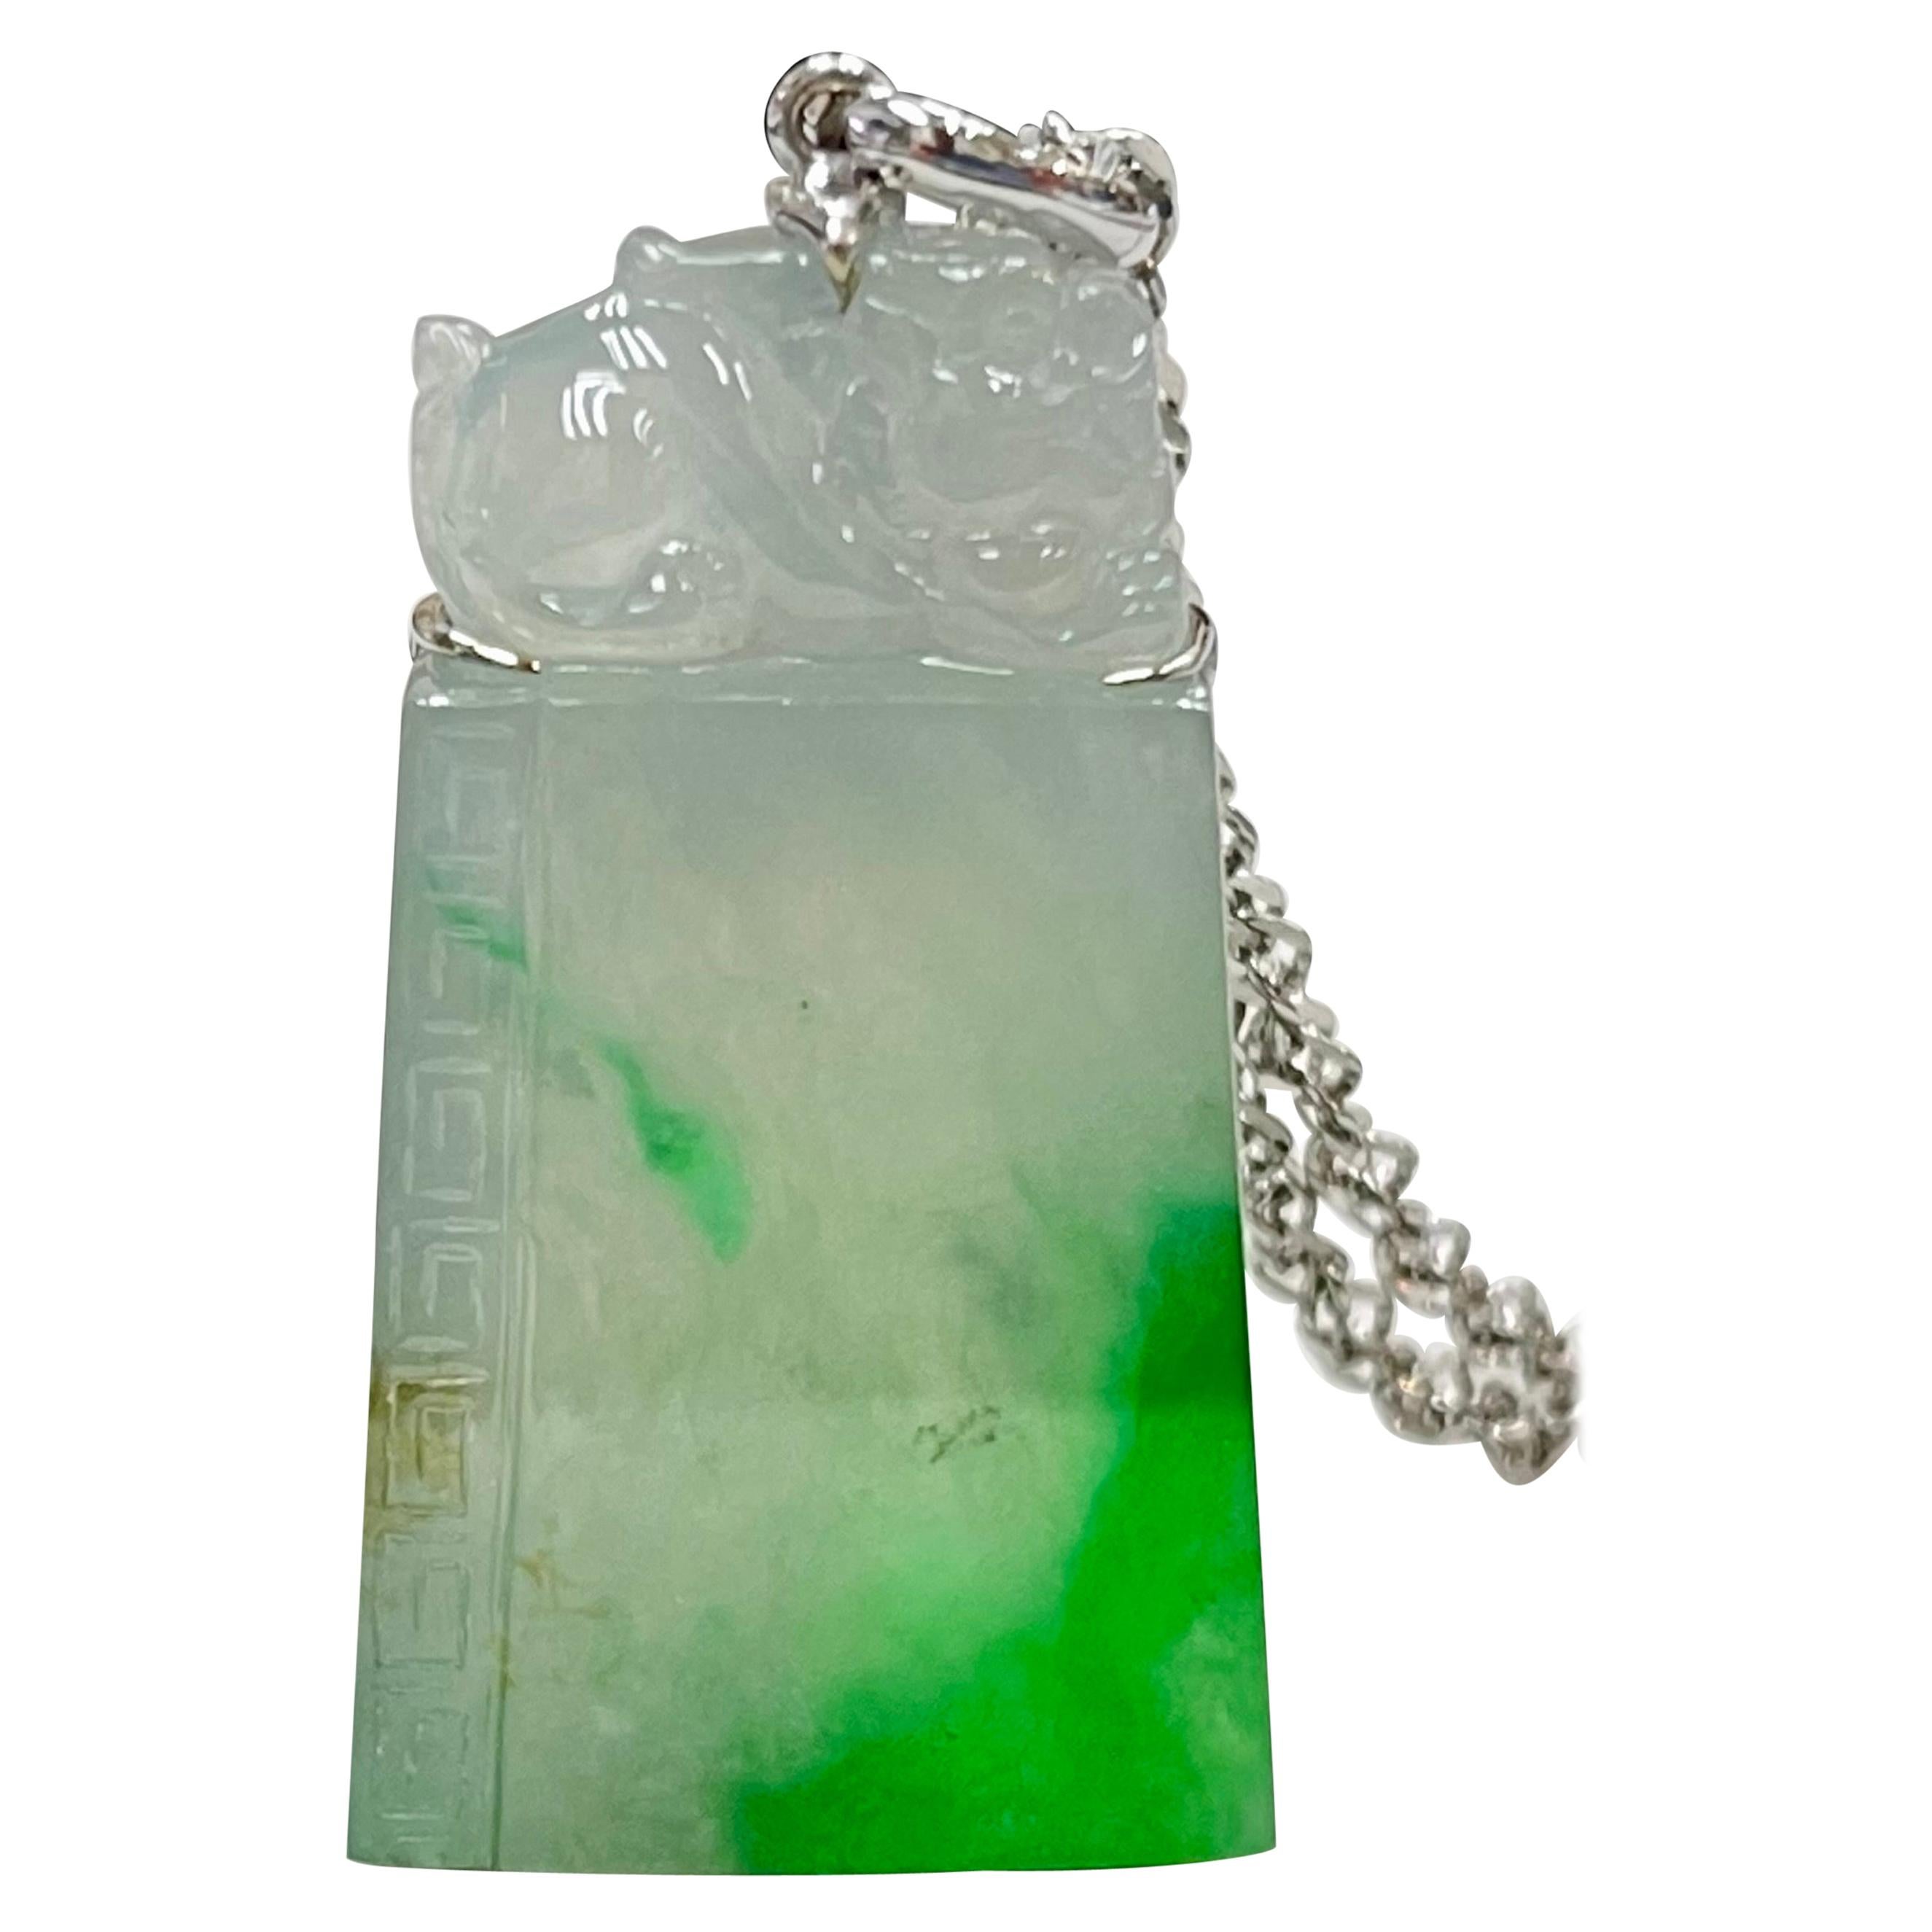 Certified 56.96cts Jadeite Pendant, Patches of Imperial Green, Brings Good Luck